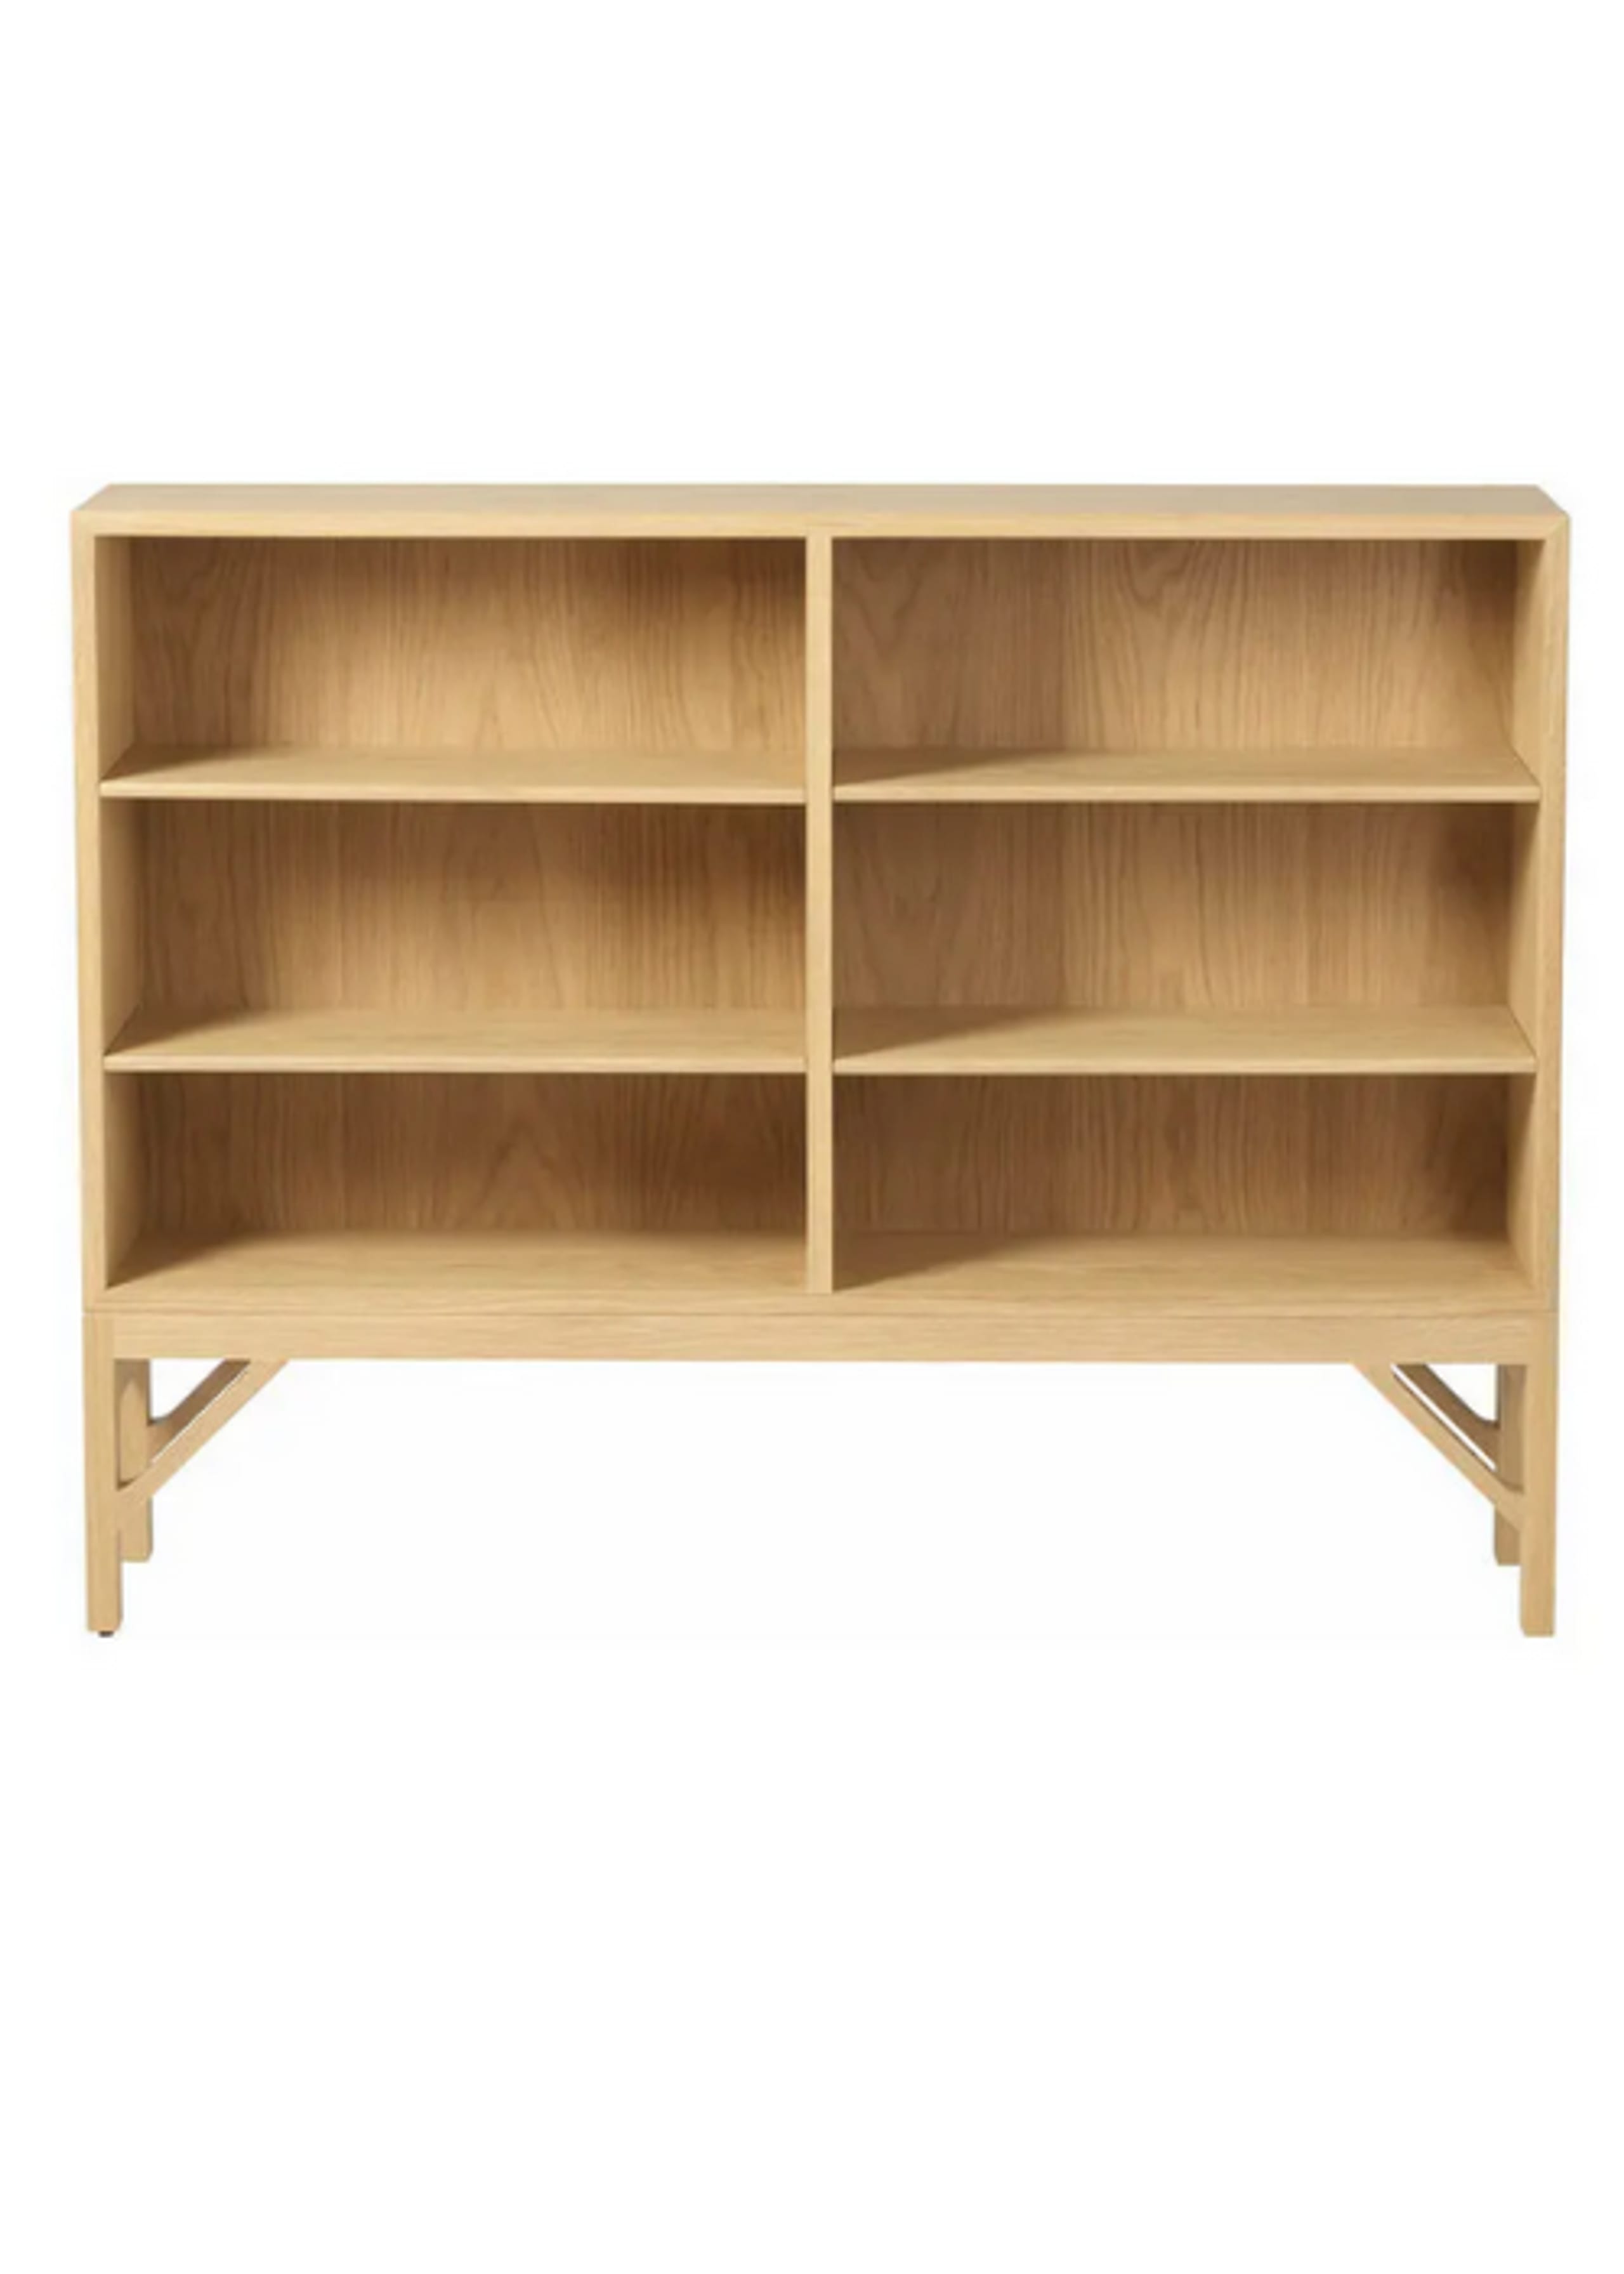 FDB Møbler / Furniture - Display - A153 - Reol - Oak - Lacquered